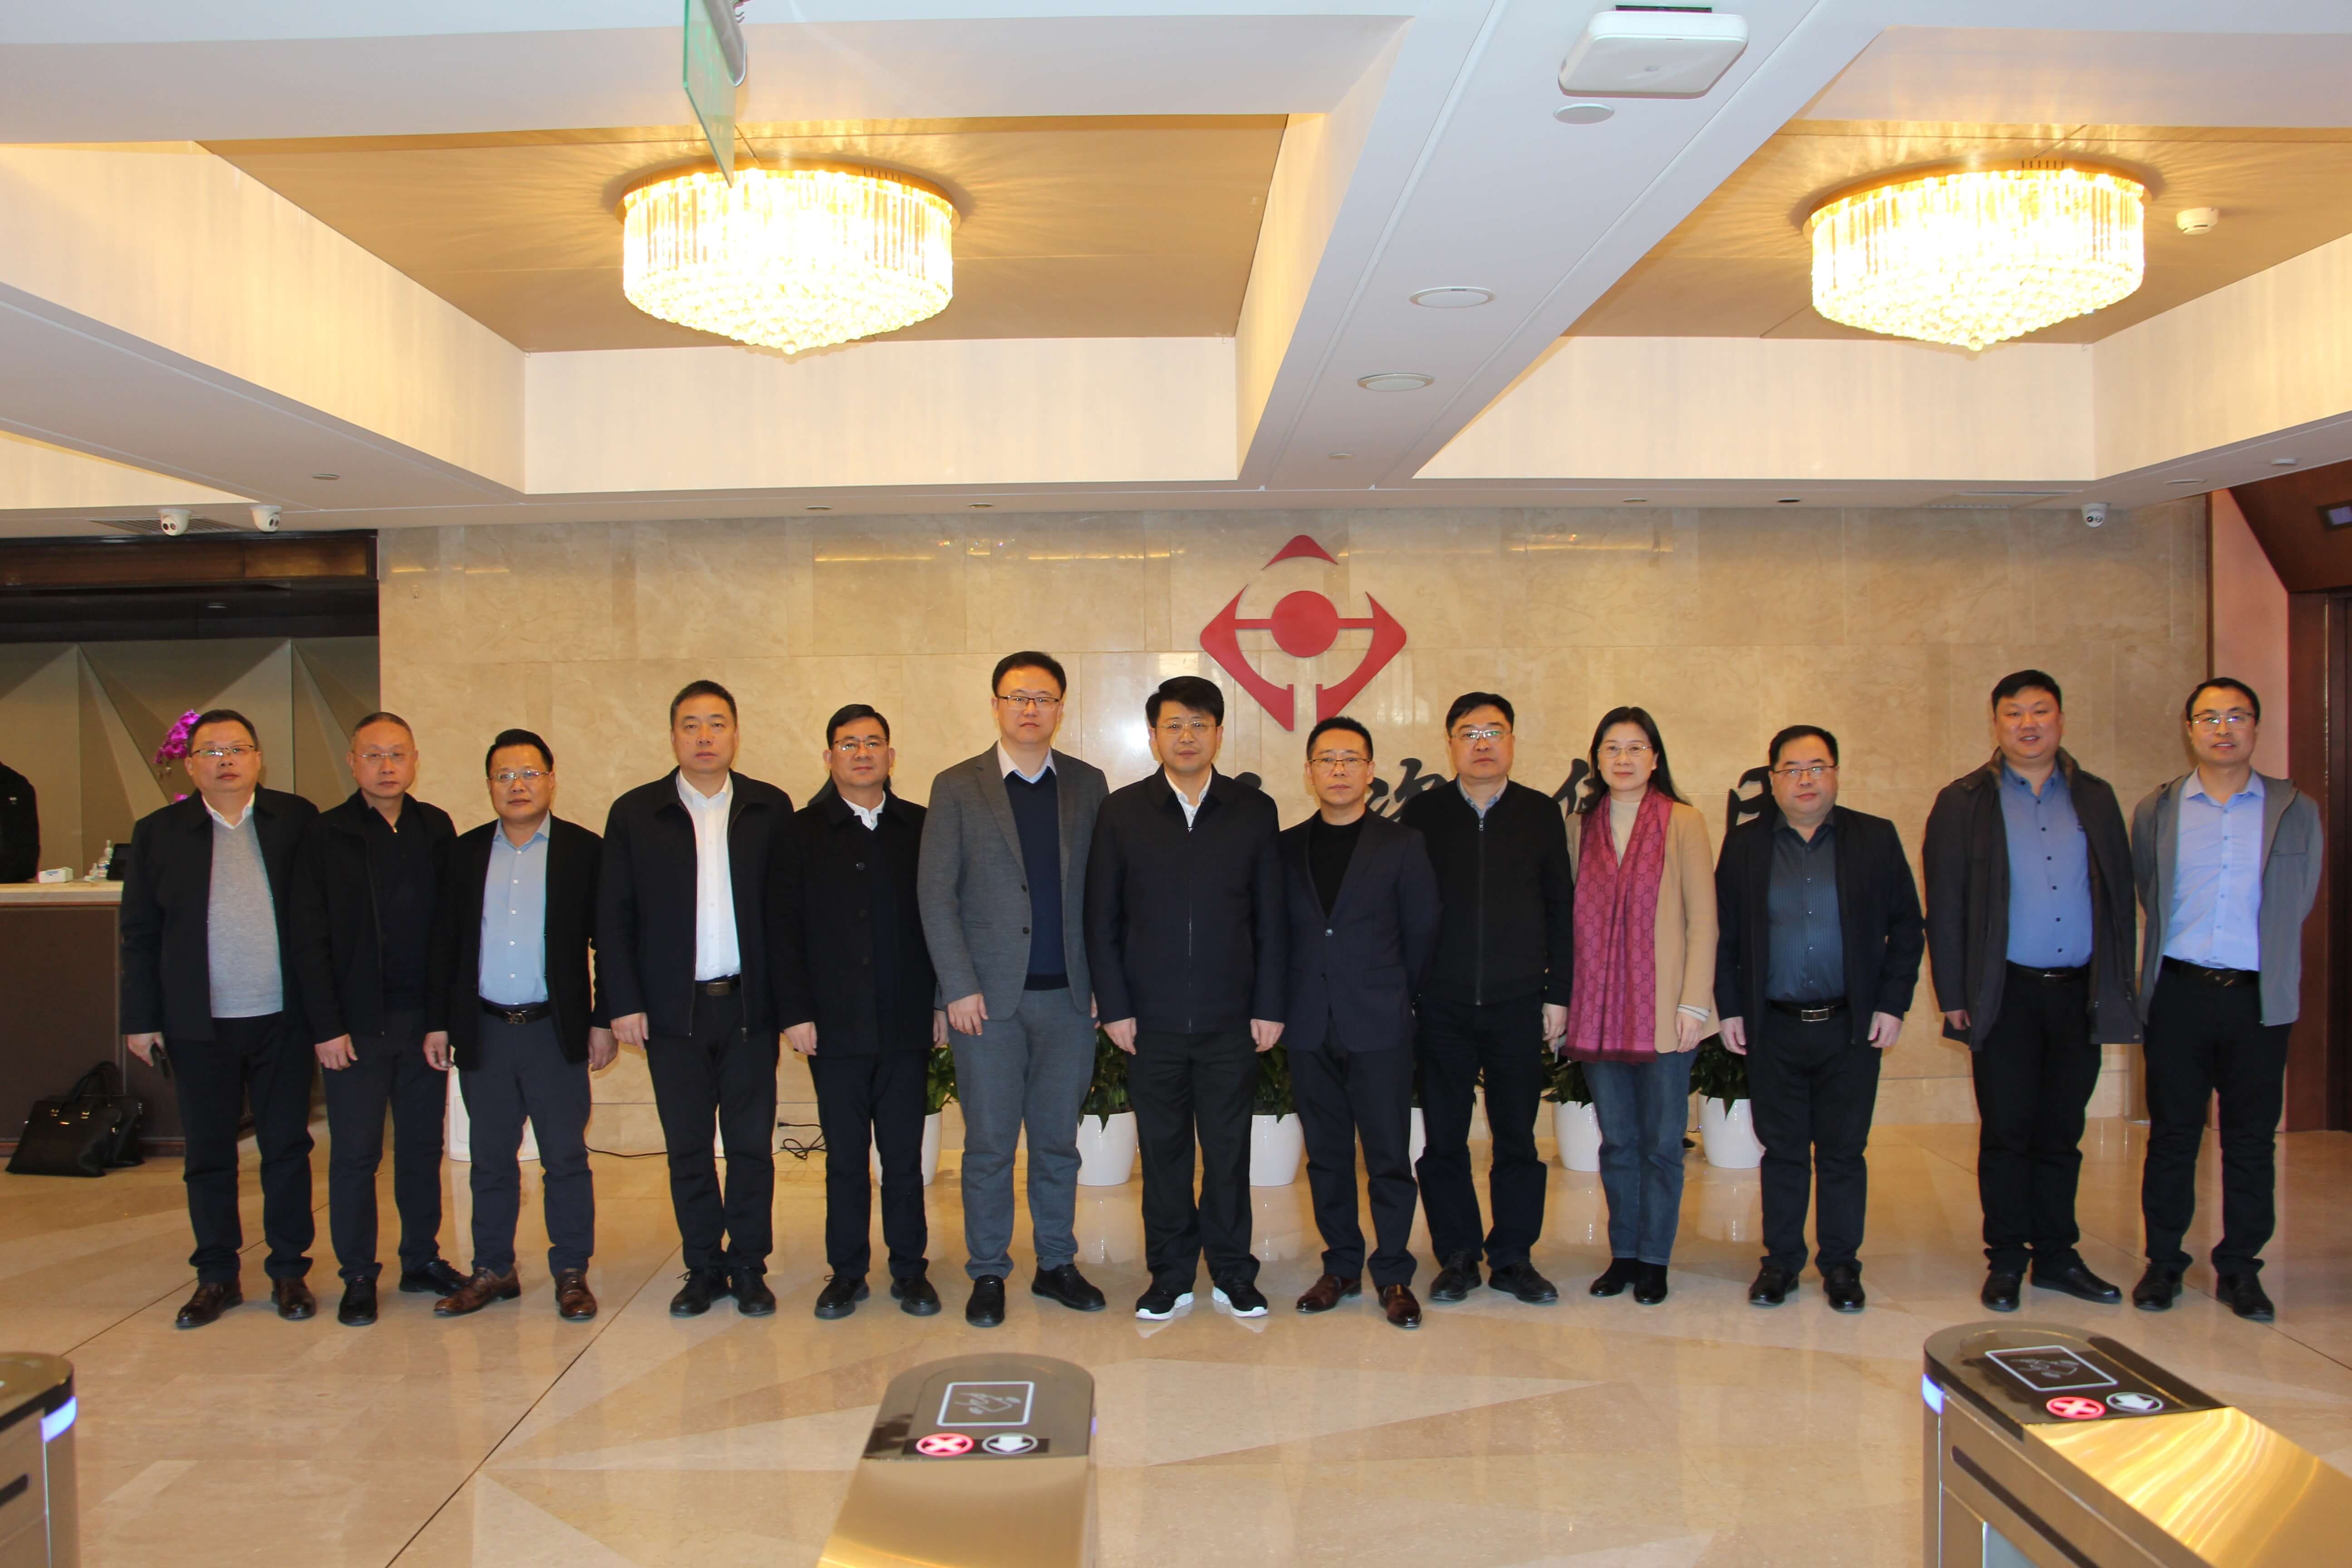 Tian Xingmin, Municipal Government Chief Of Gaoyou City, Jiangsu Province, Led A Delegation To Visit The Headquarters of CHINAYONG Group And Reach A Consensus On Cooperation In The Field of Lighting